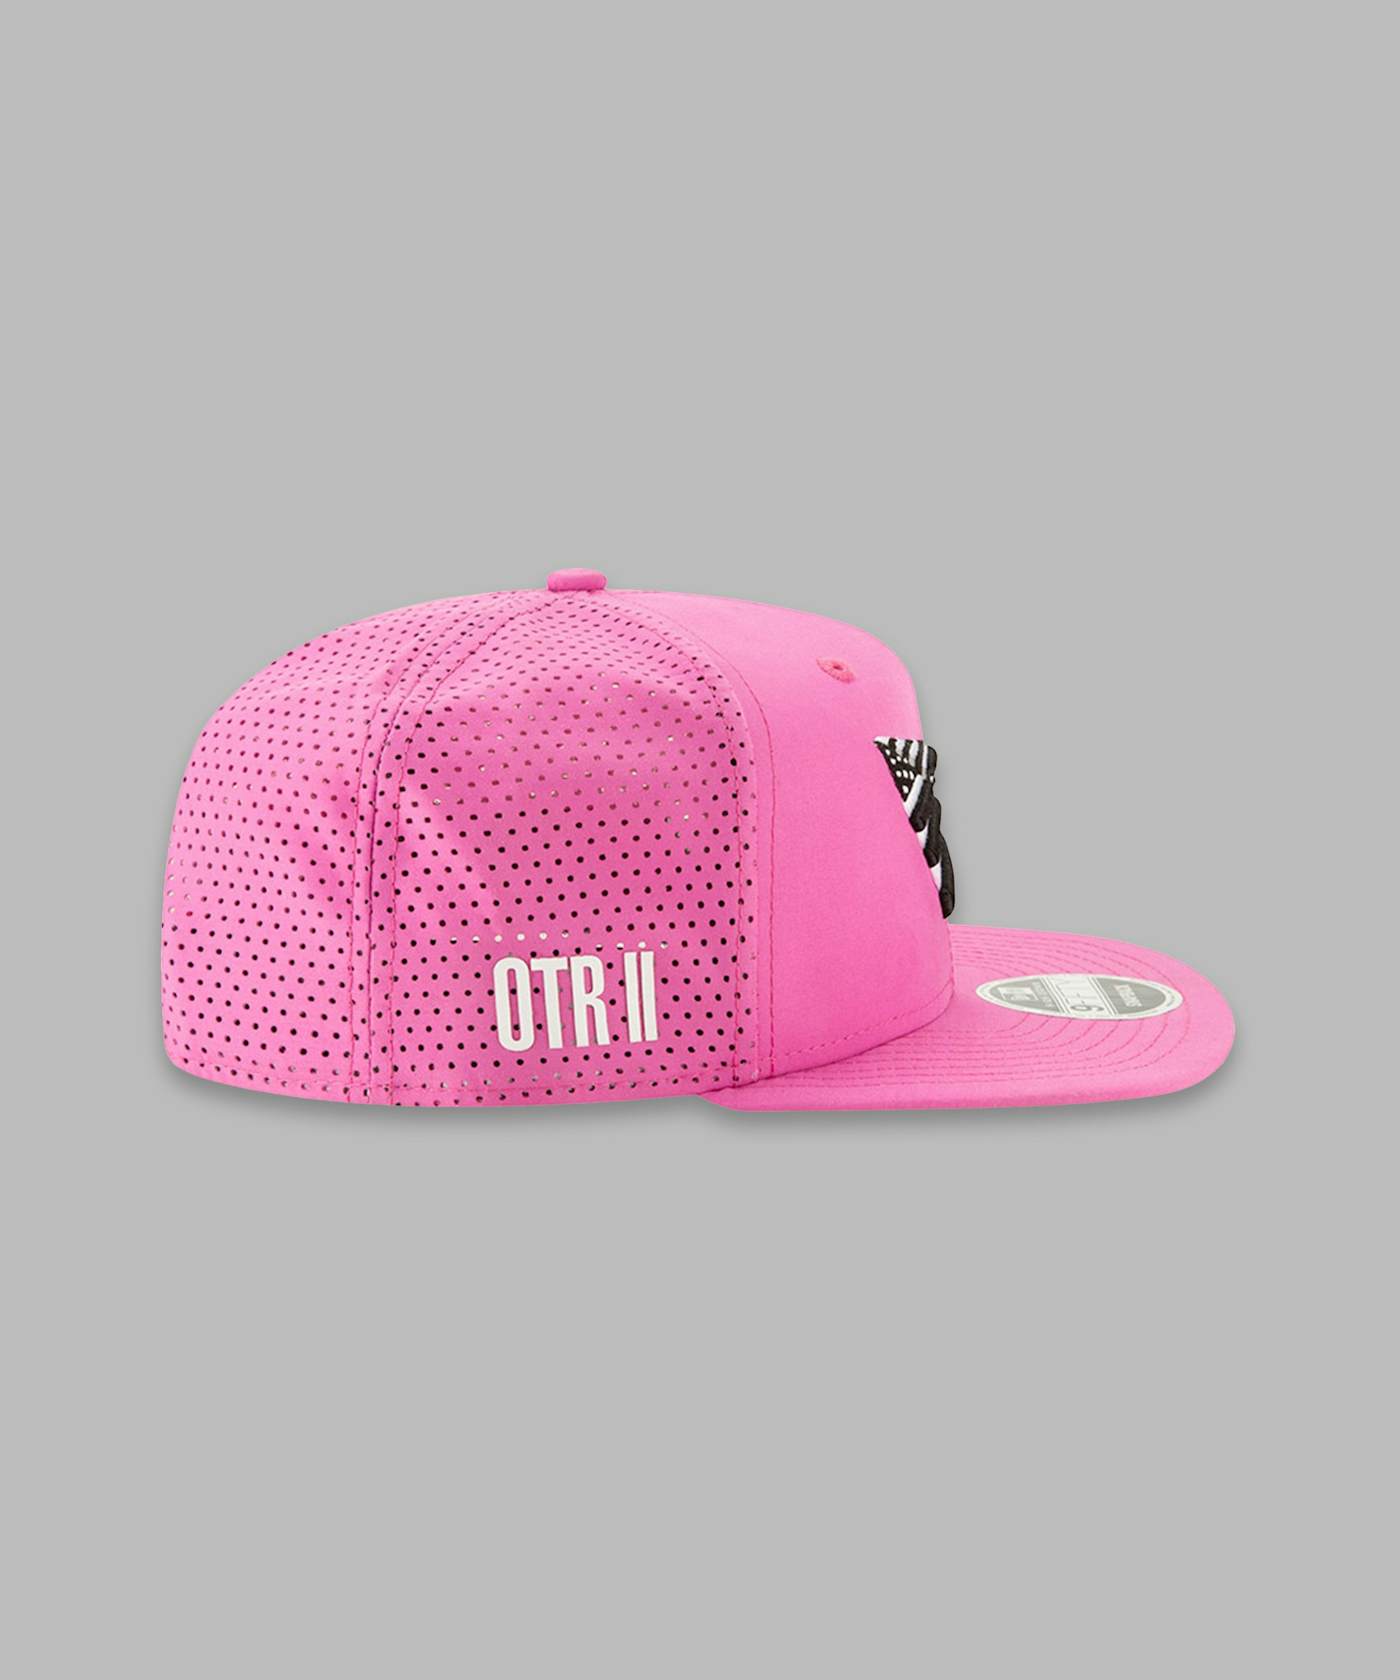 JAY-Z Perforated Black On The Run II High Crown 9Fifty Snapback Hat $45.00